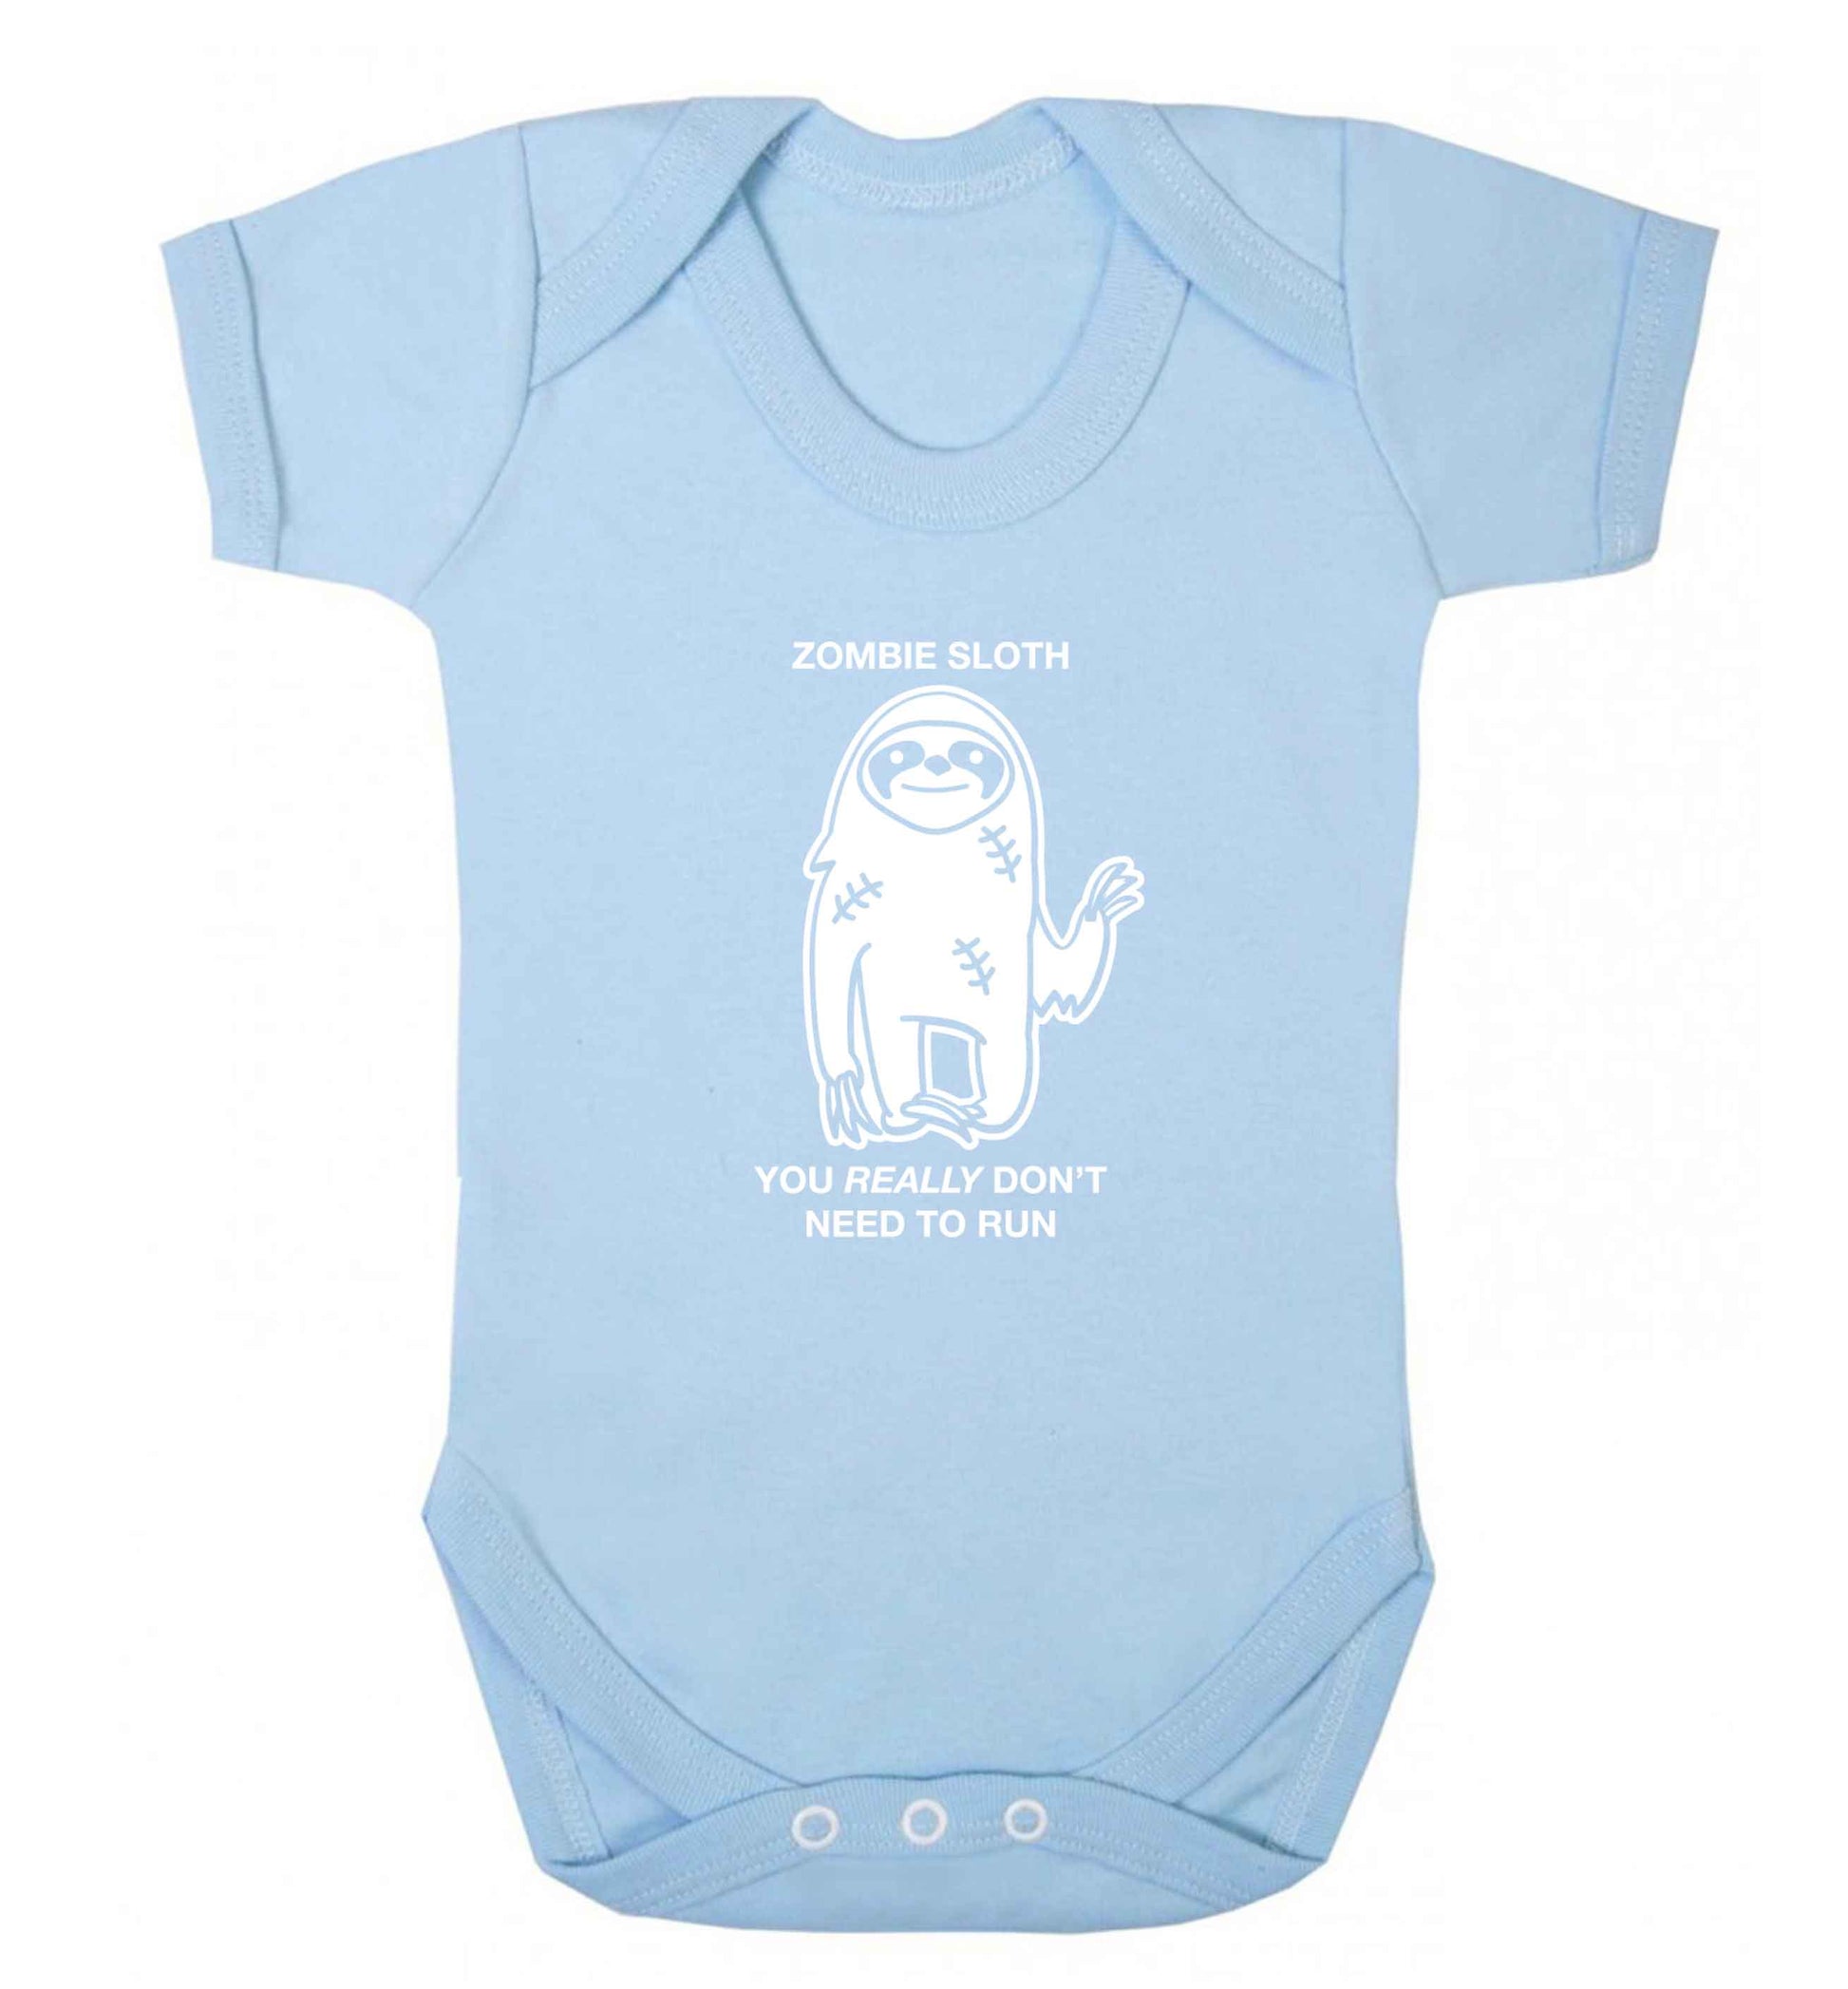 Zombie sloth you really don't need to run baby vest pale blue 18-24 months